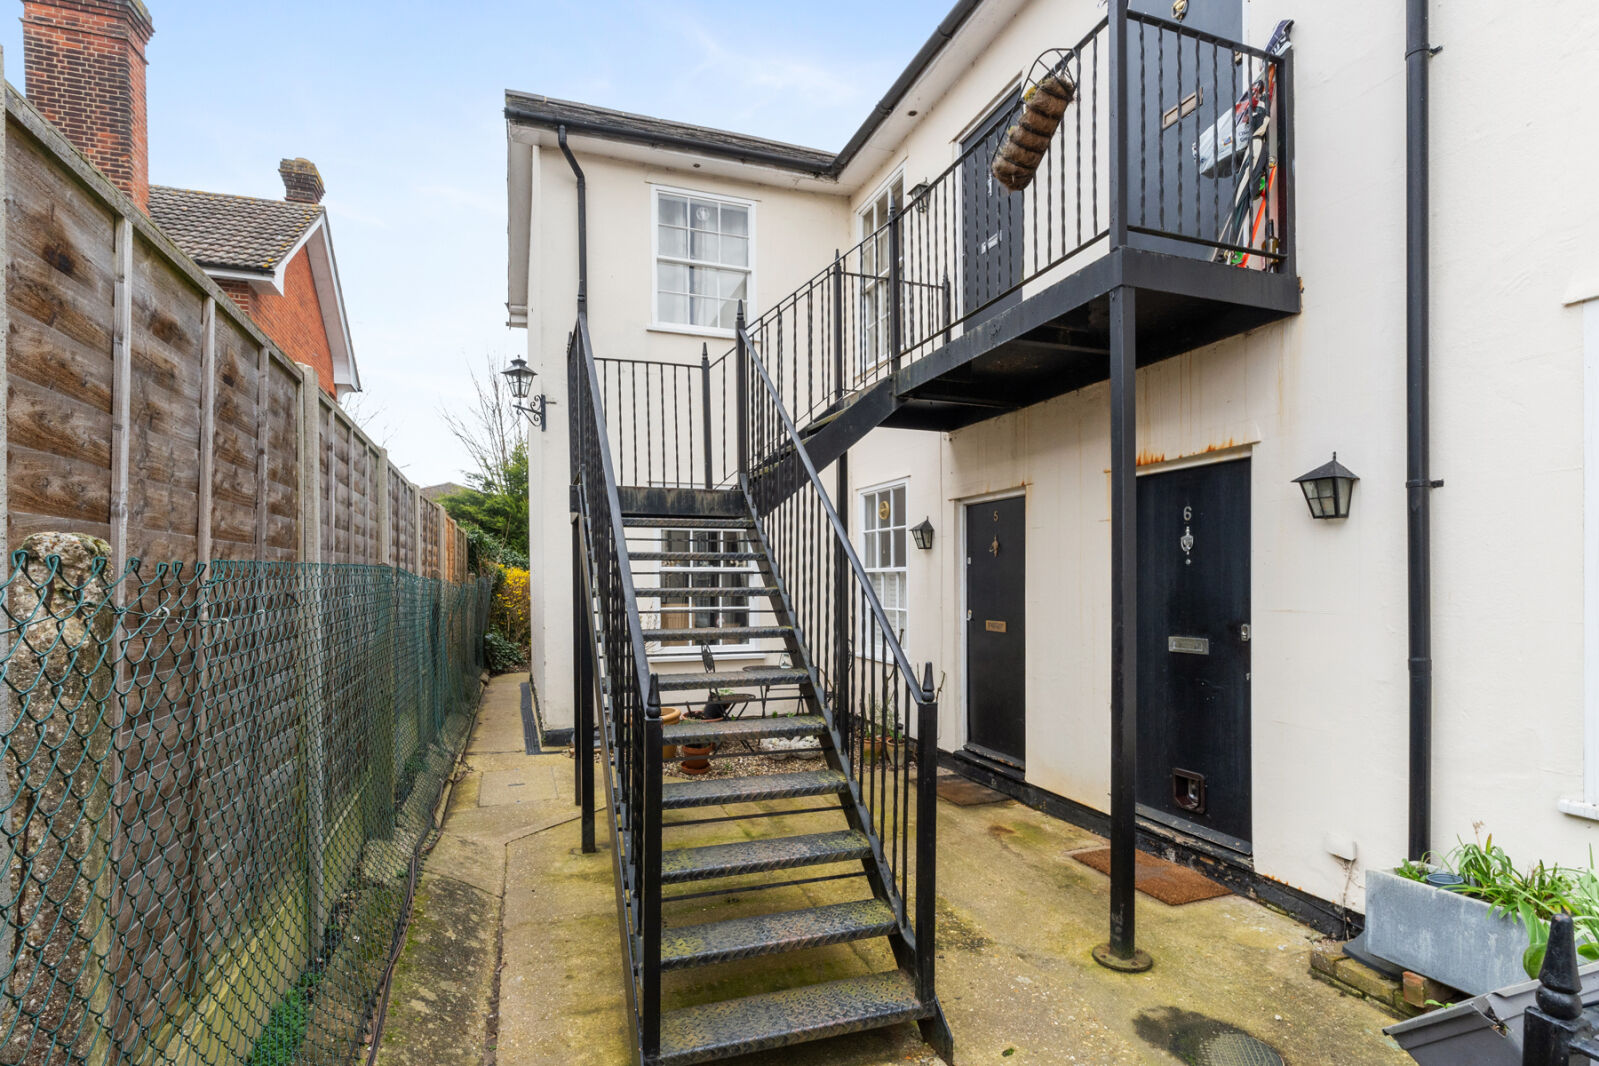 1 bedroom  flat for sale Chapel Hill, Stansted, CM24, main image